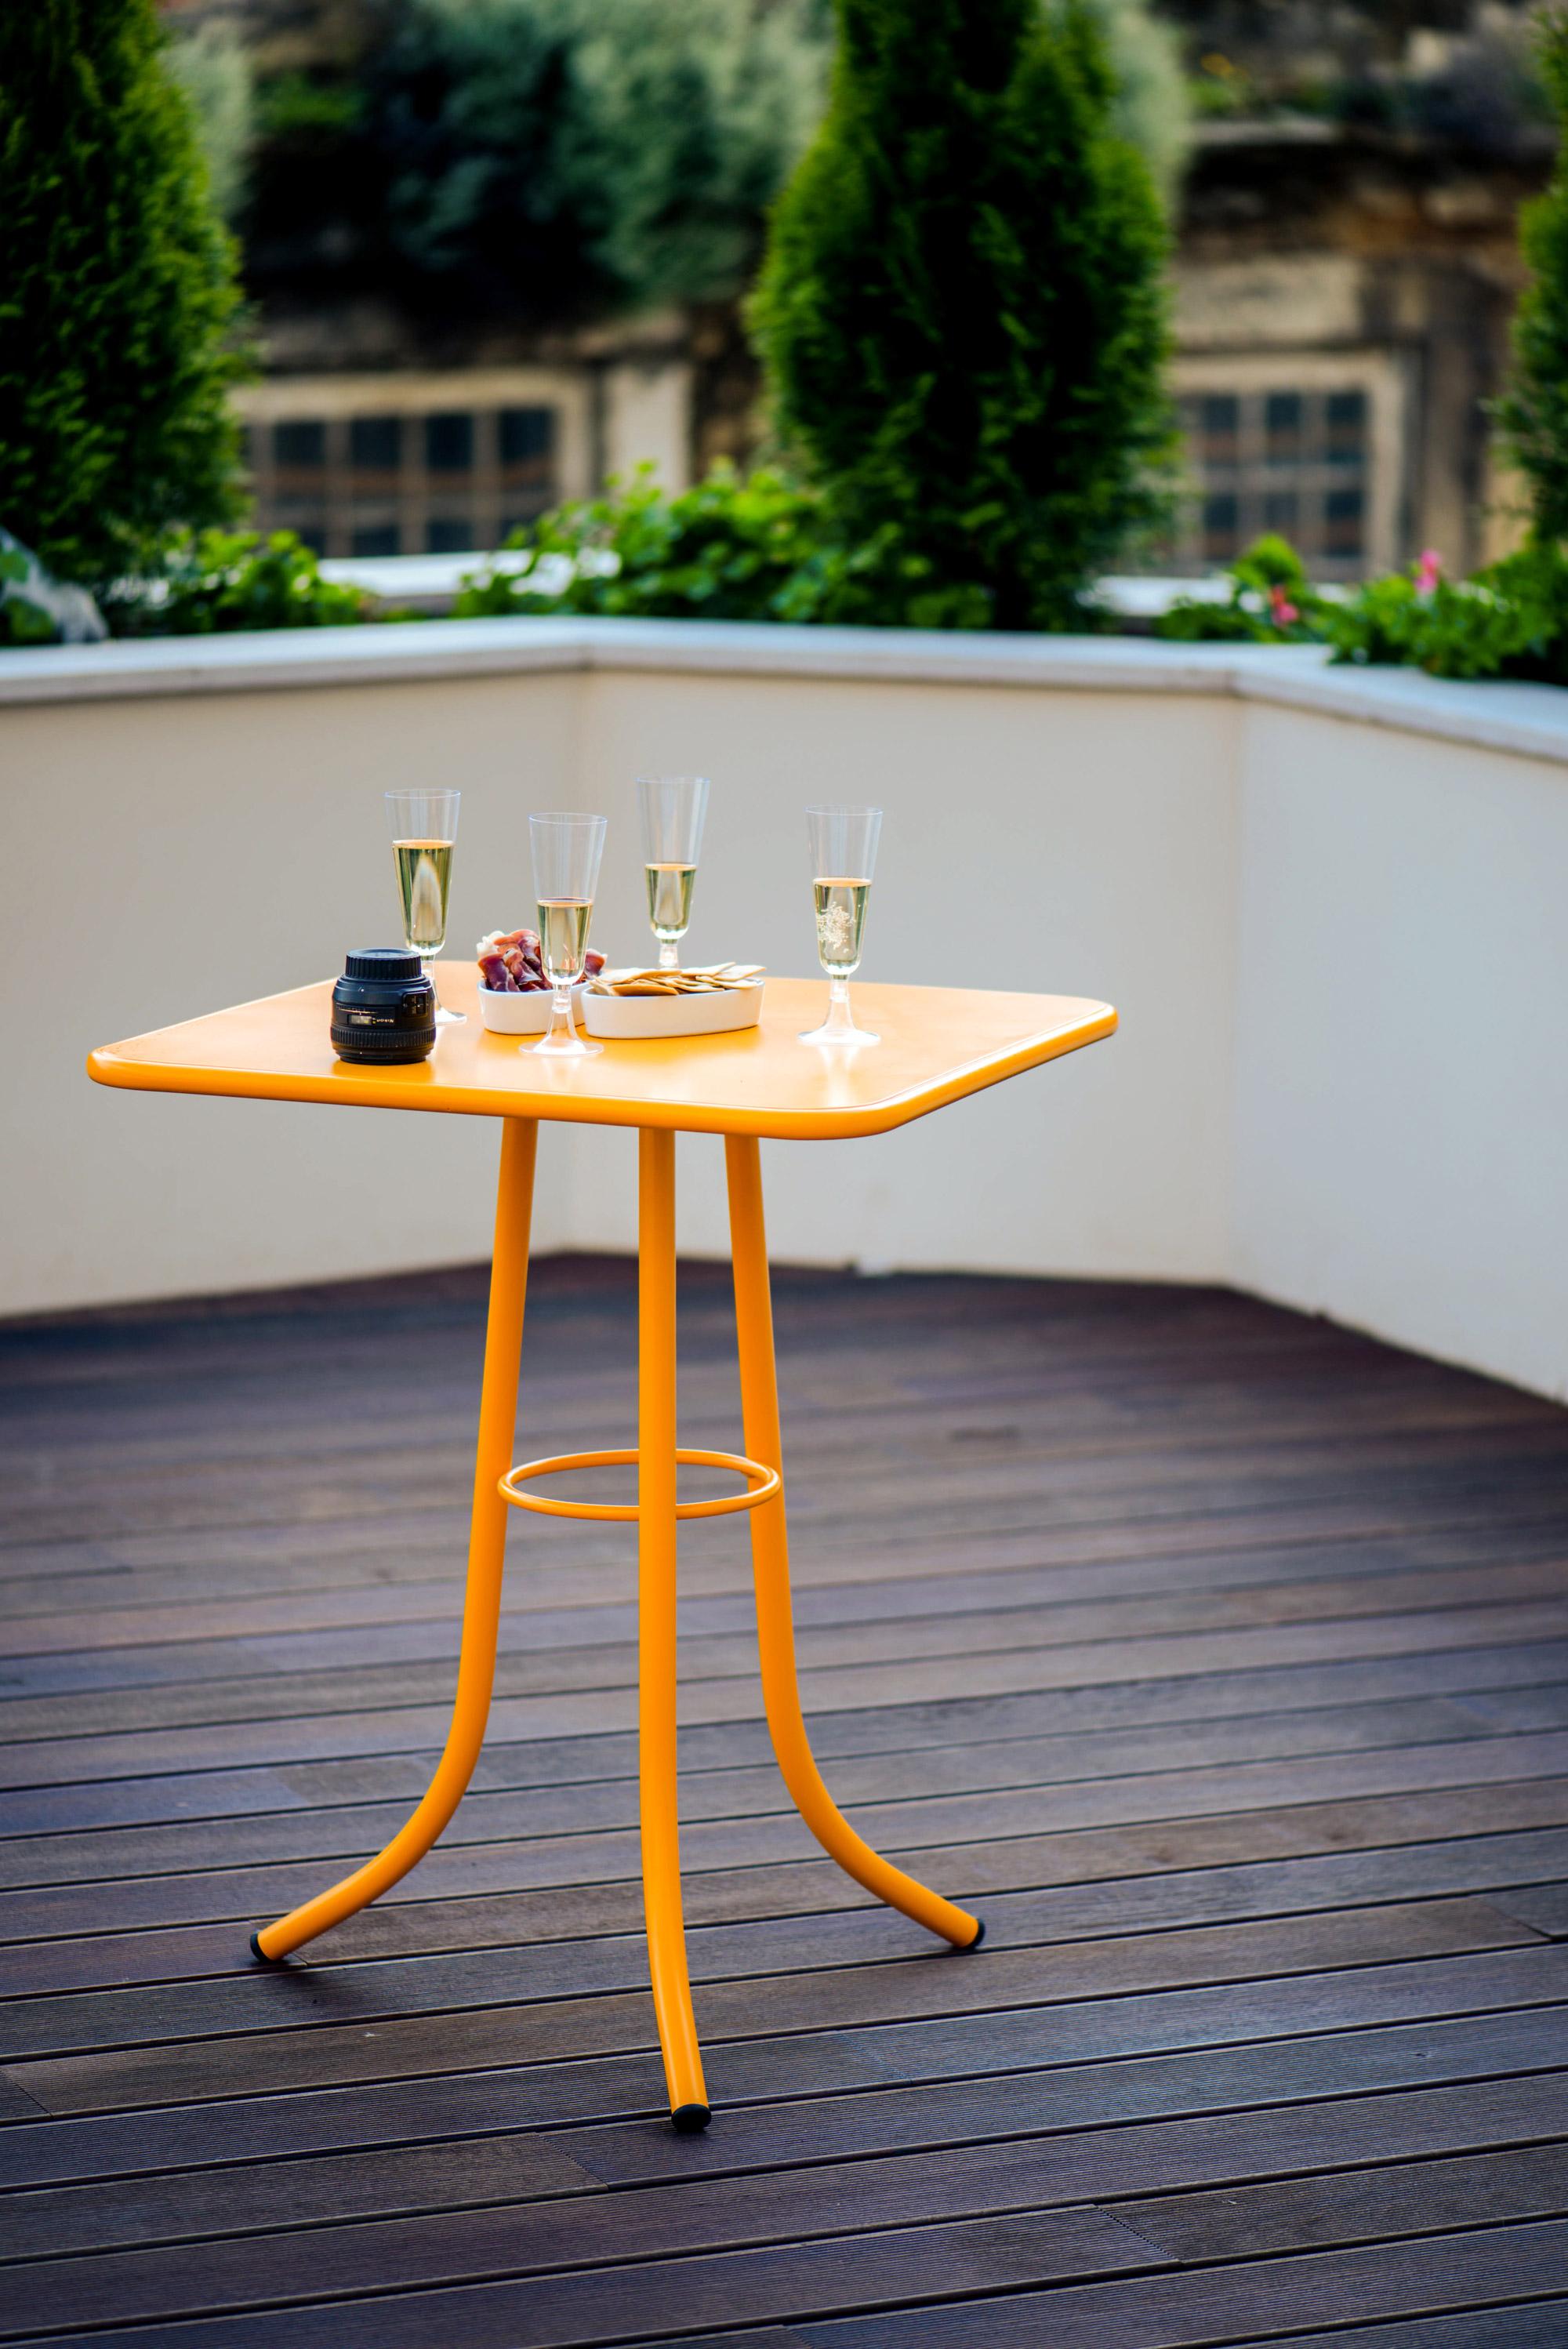 BICAtable 3 is a sustainable steel three-legged table made for the outdoors from recycled and recyclable steel and finished with our premium selection of powder-coating colors, in this case in a bright yellow color, that transforms a Classic in